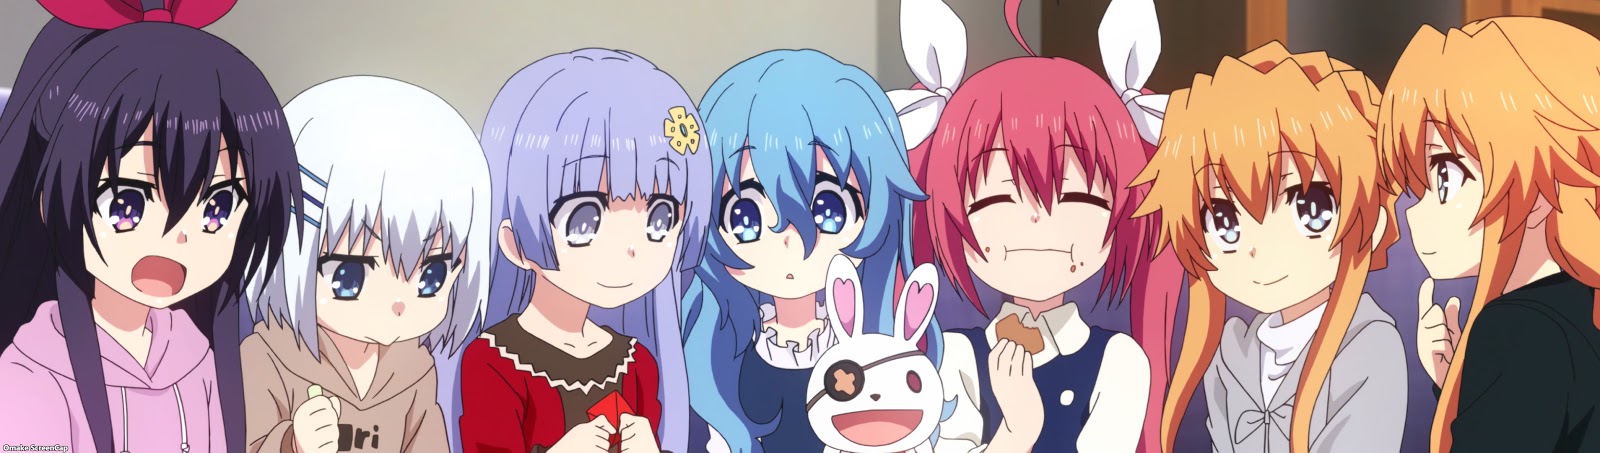 Joeschmo's Gears and Grounds: Date a Live IV - Episode 3 - Bunny Spirits  Sell Shido's Book